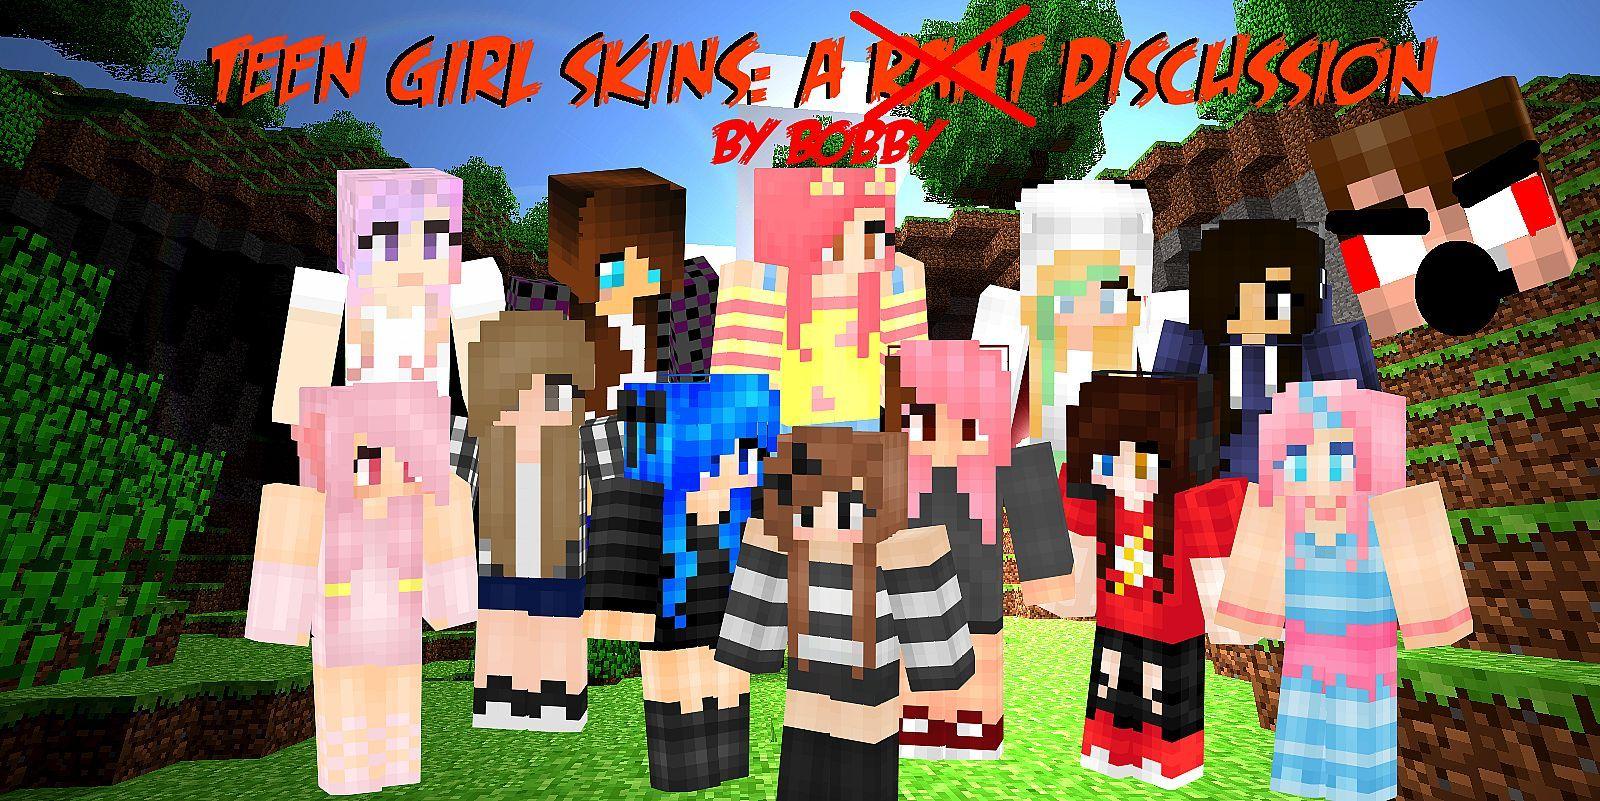 TEEN GIRL SKINS: A DISCUSSION Minecraft Blog